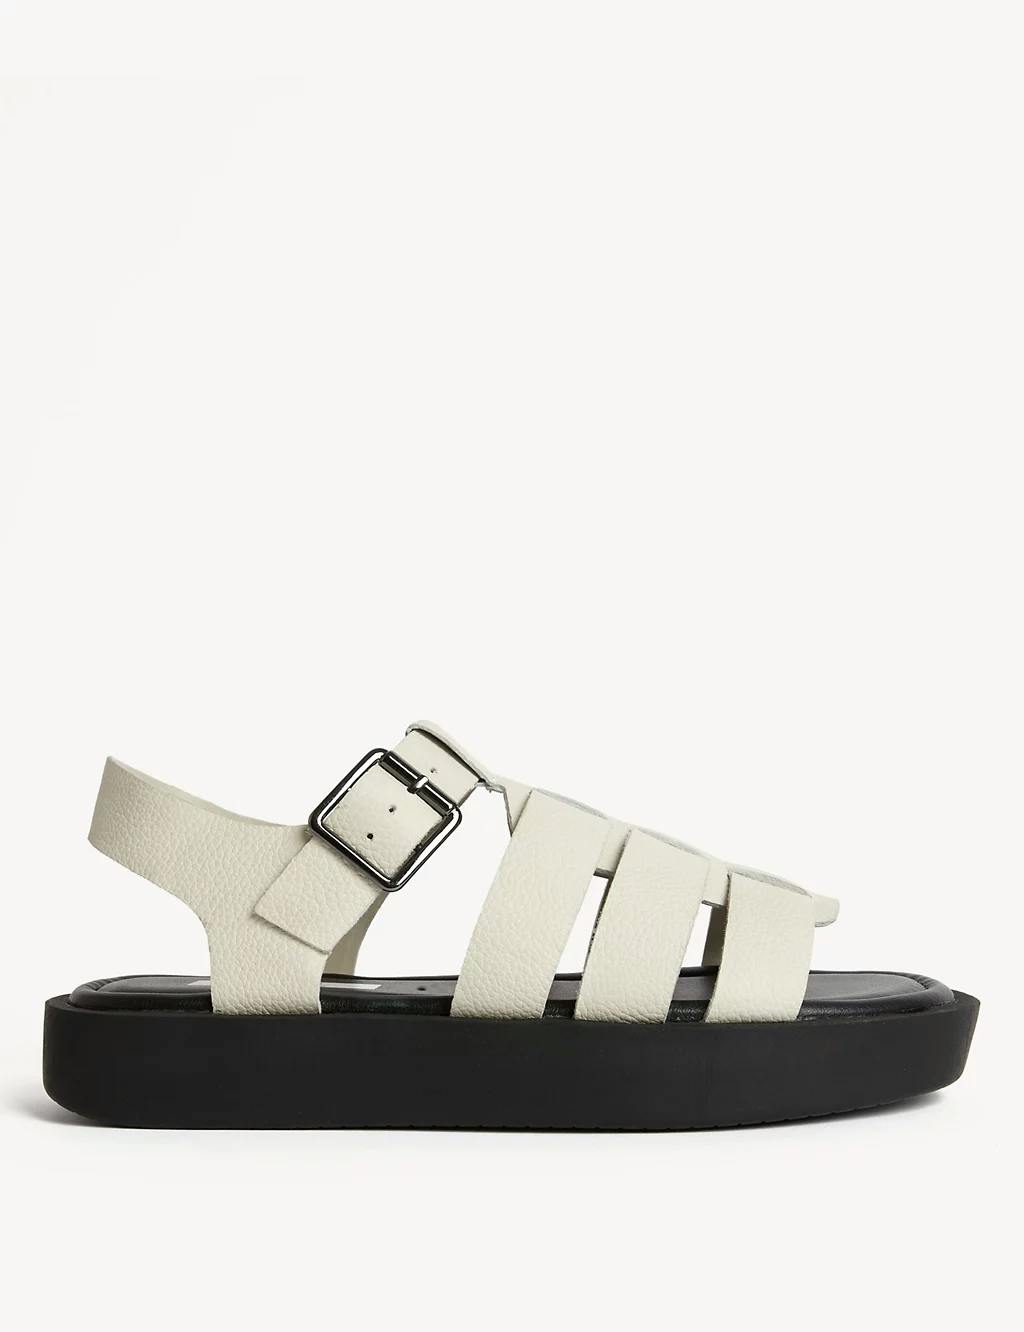 23 Birkenstock dupes from M&S have been dubbed 'perfect'